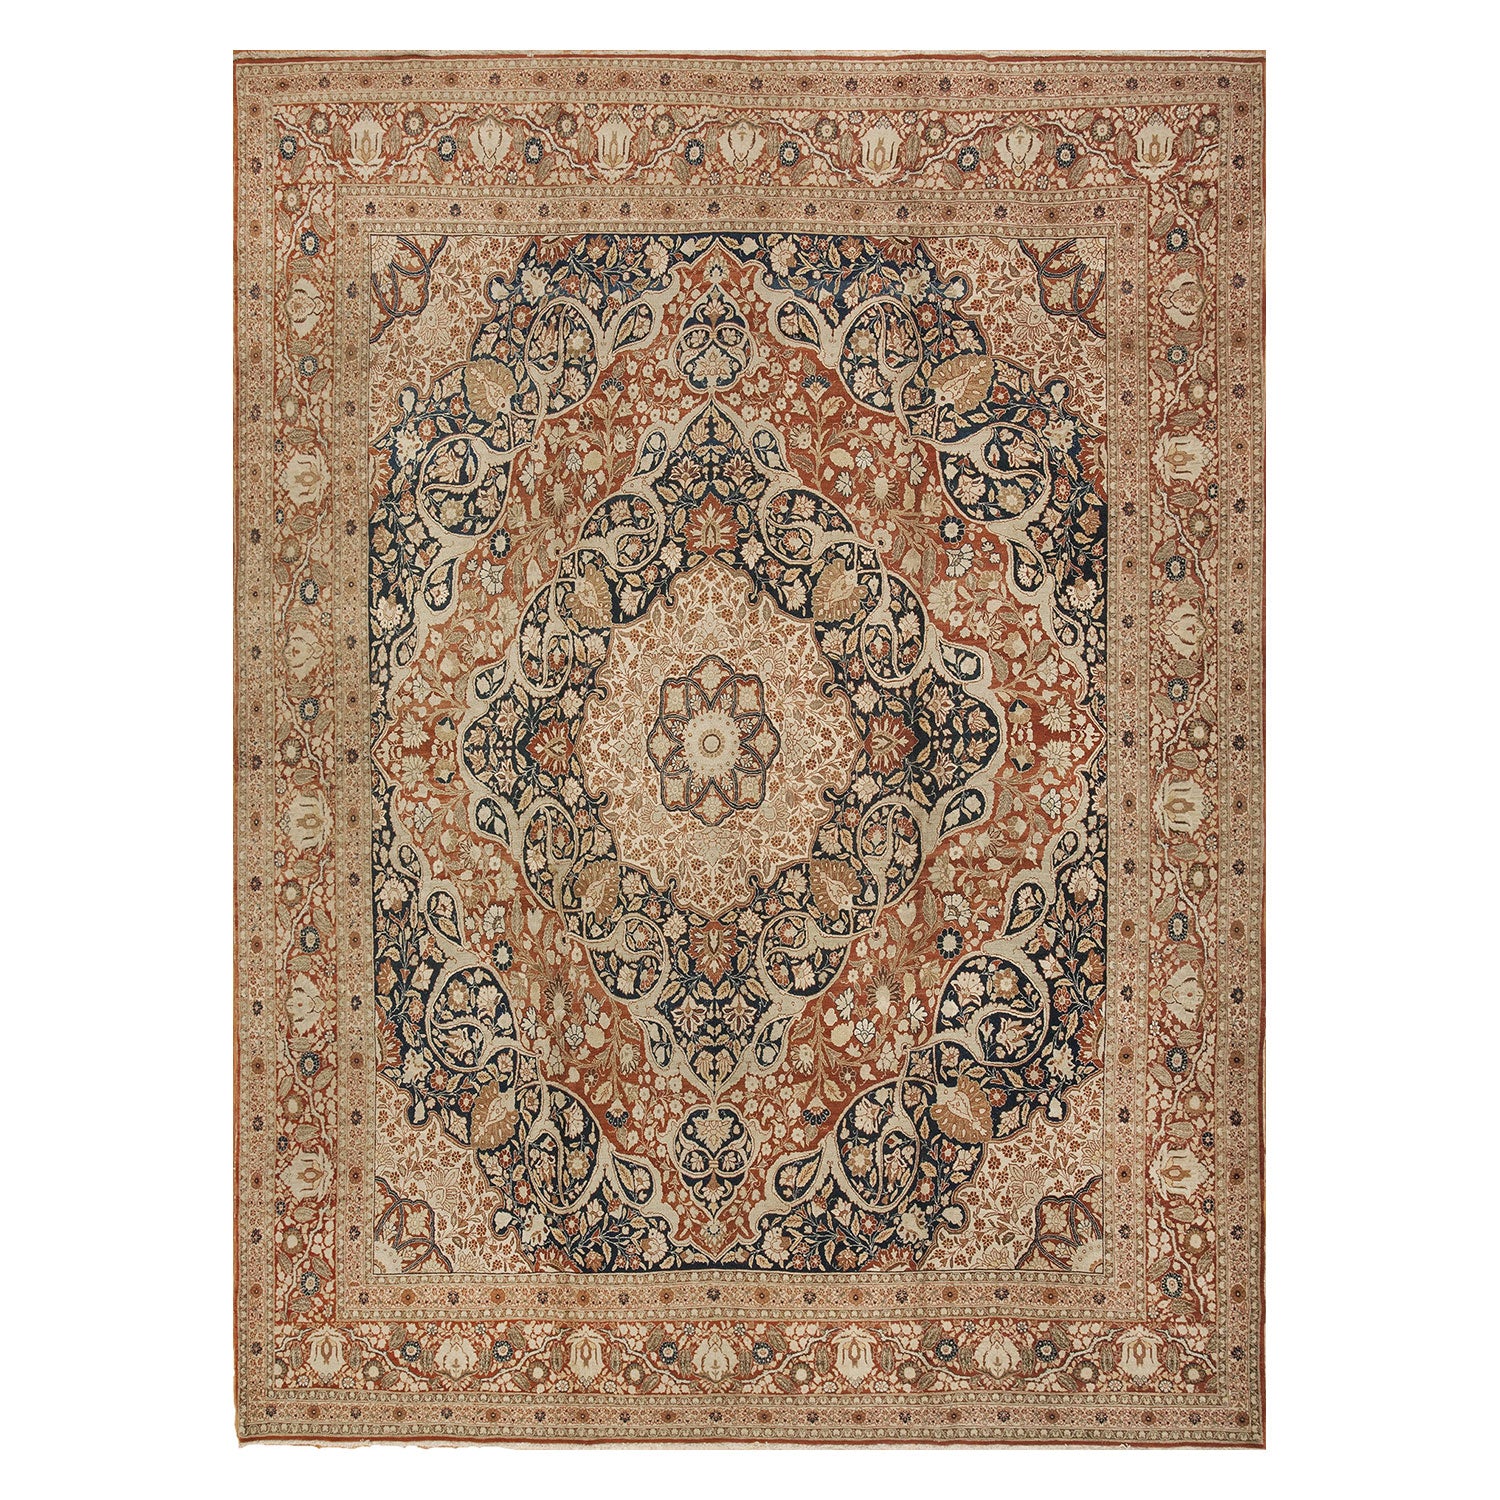 An intricately designed Persian area rug with warm earth tones.